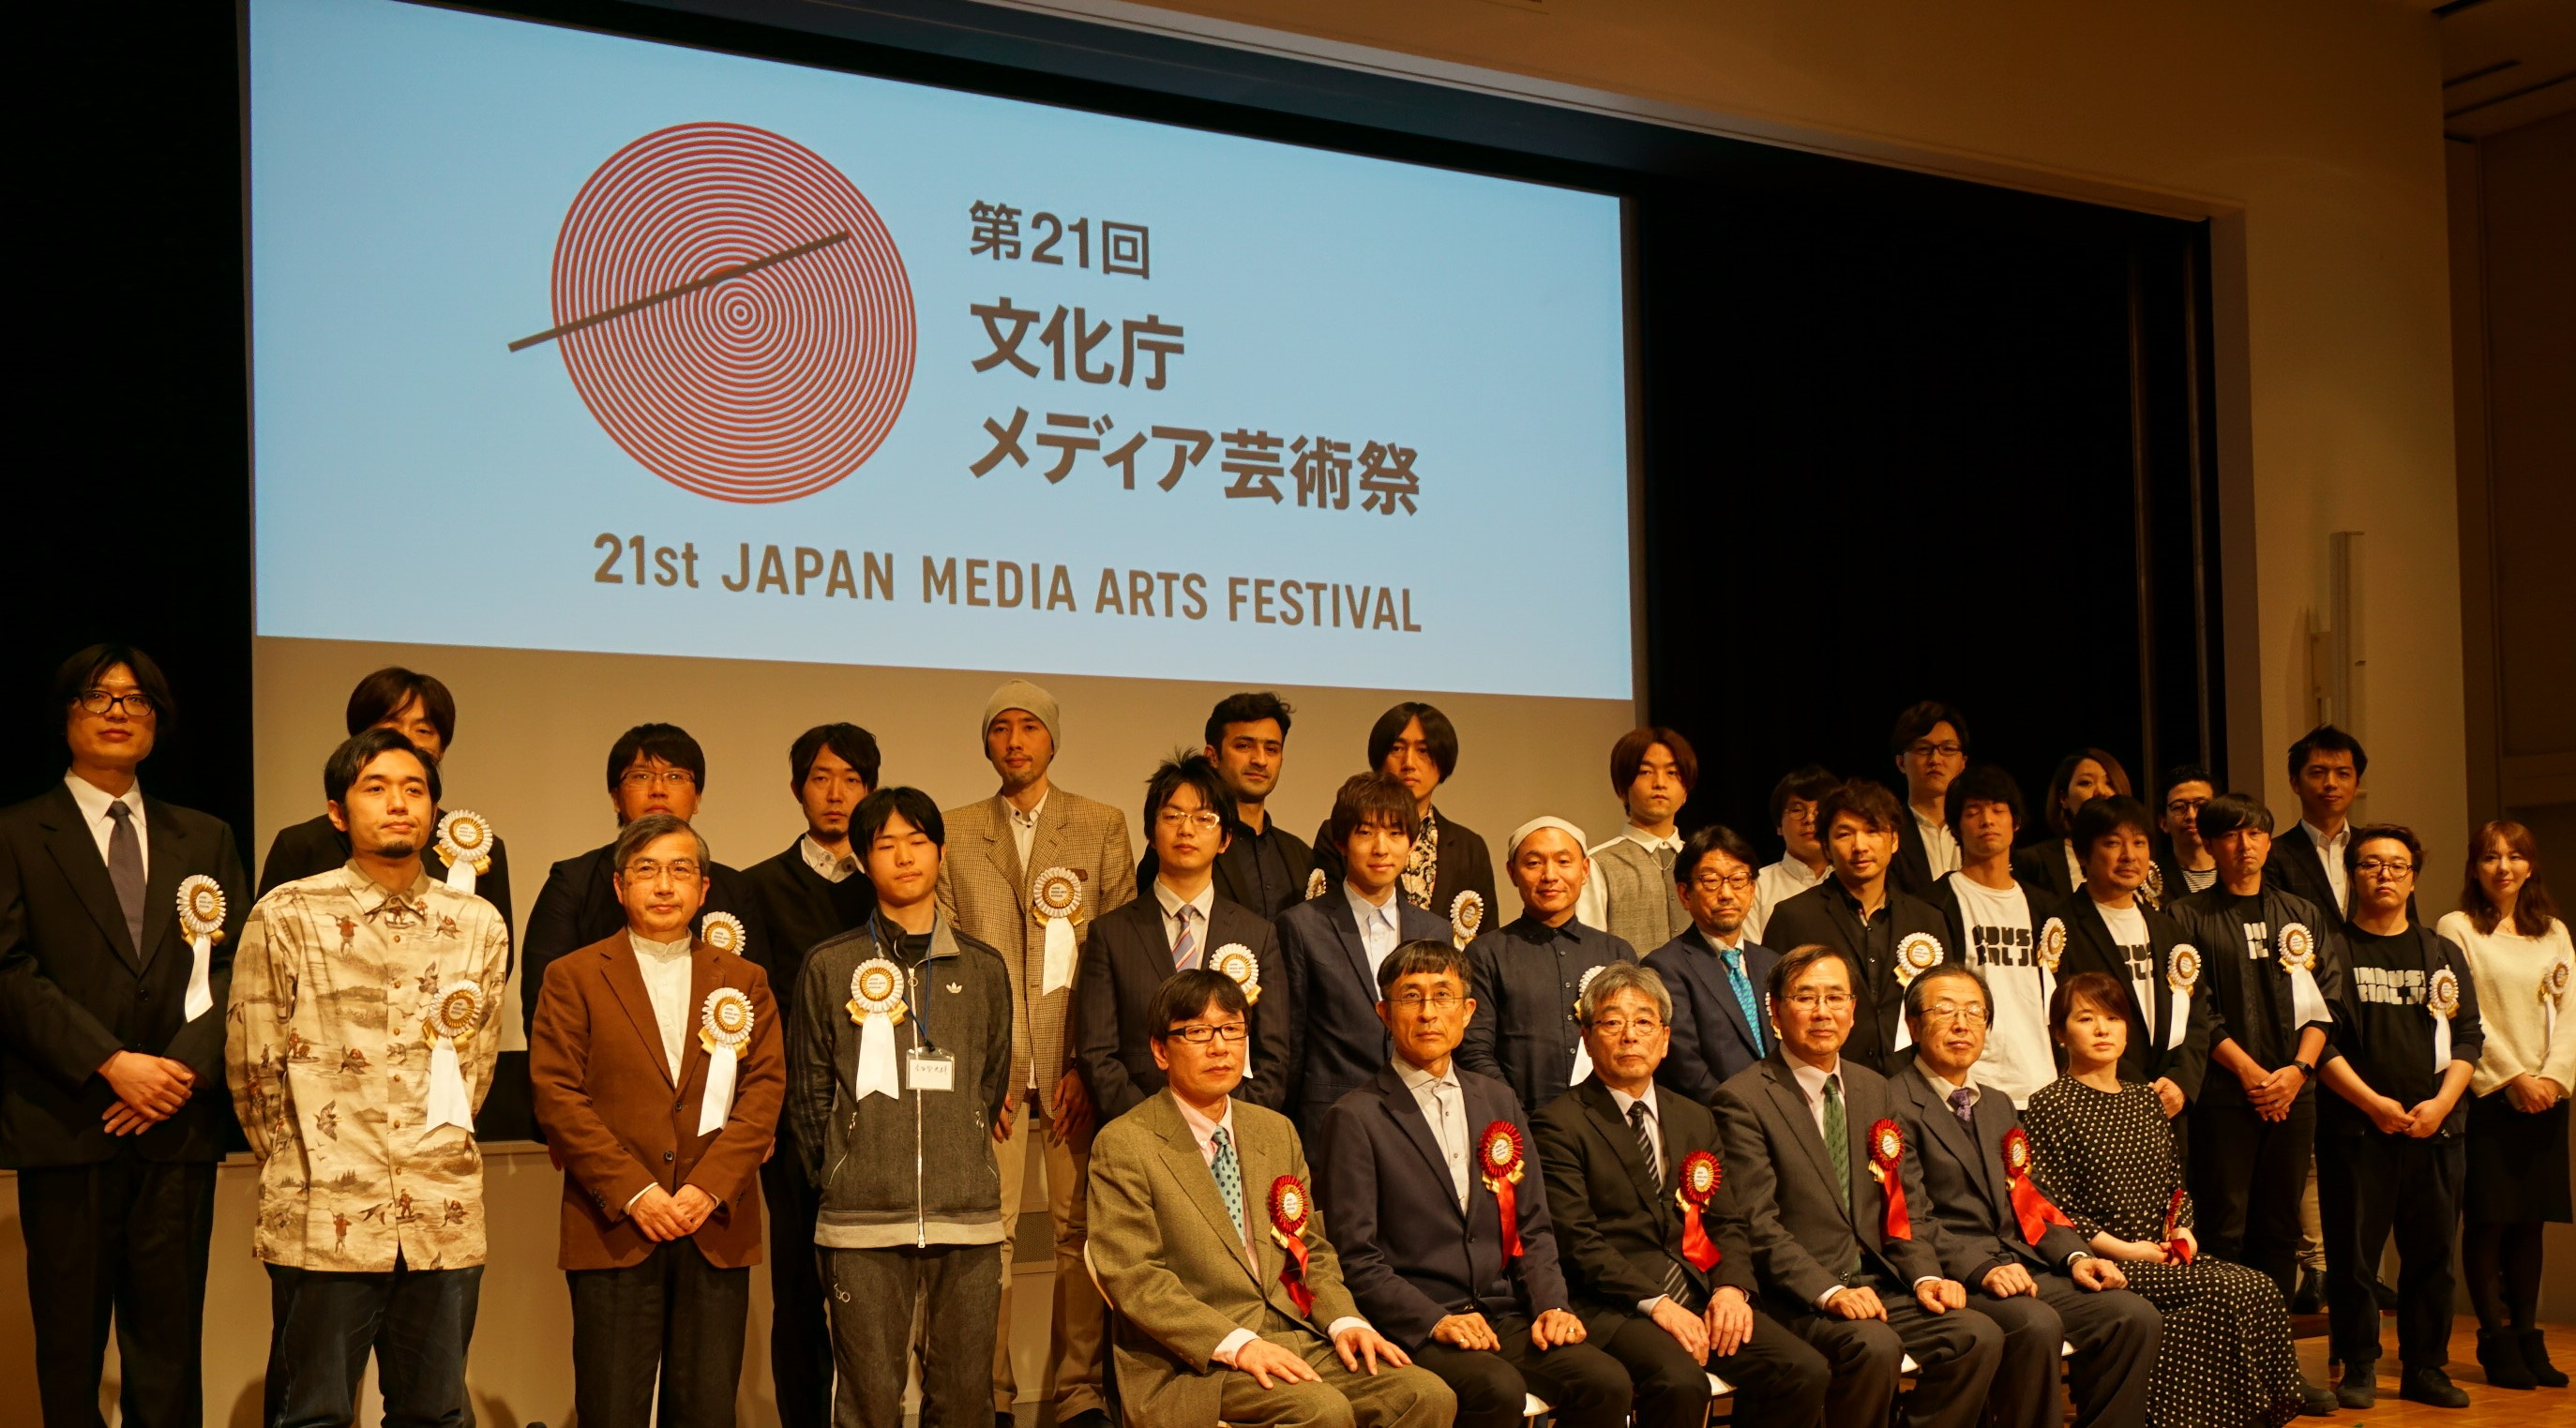 Preferred Networks’ automatic coloring service PaintsChainer receives the Excellence Award at the 21st Japan Media Arts Festival